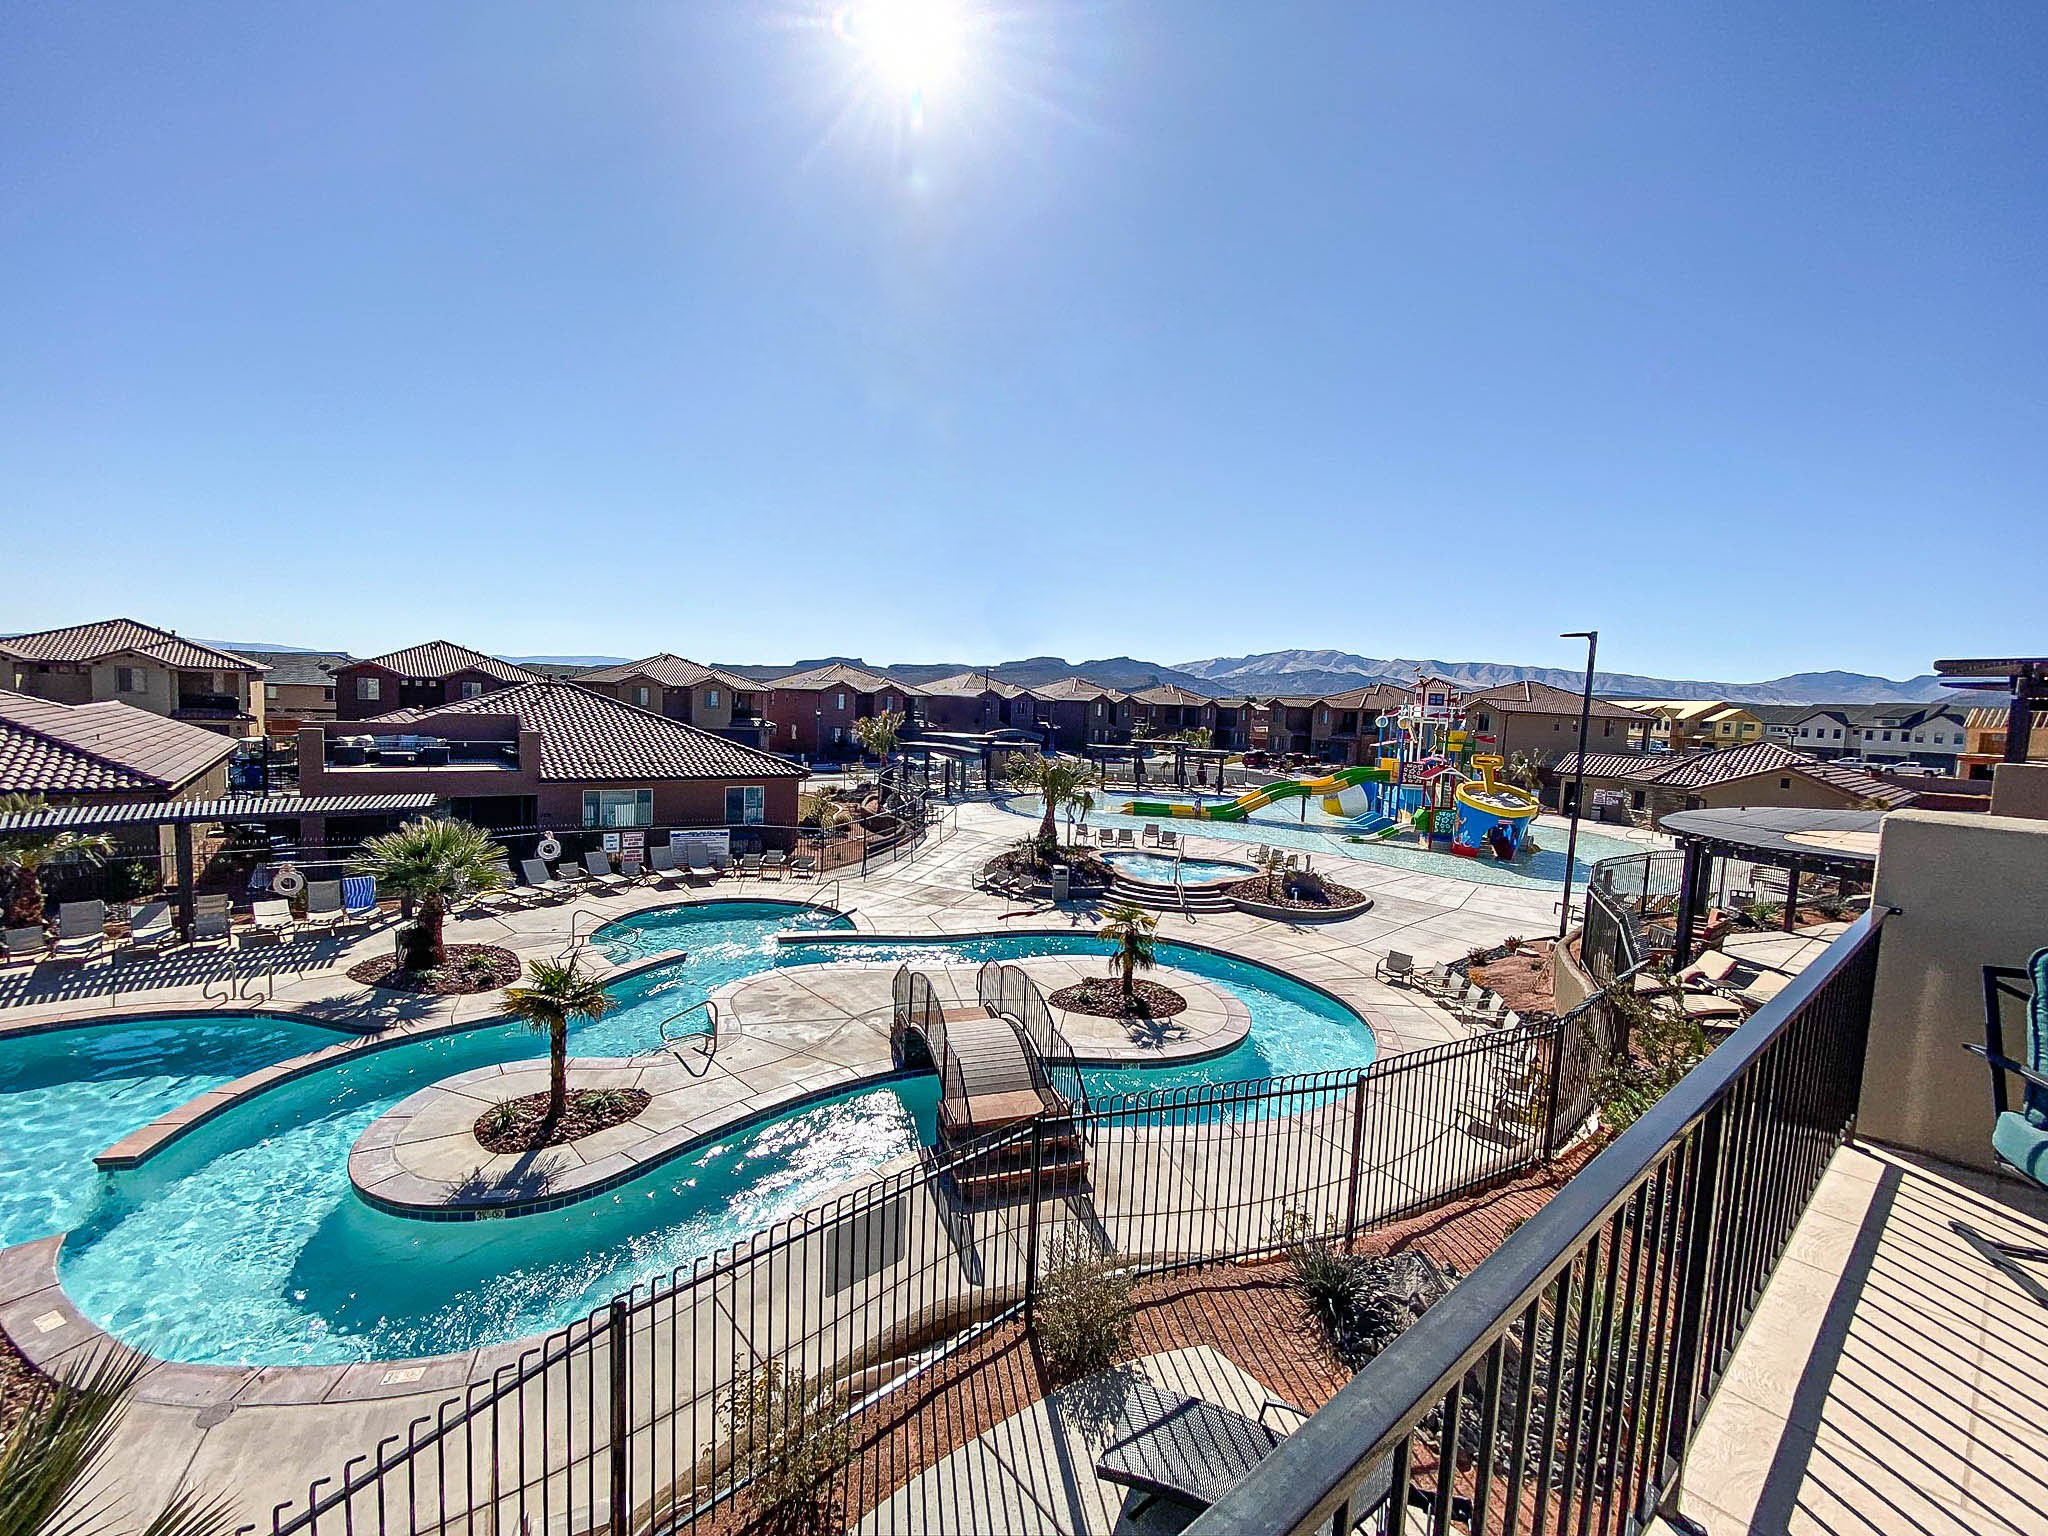 Awesome view of Lazy River and Kids Cove Waterslides right from the rooftop deck and back patio.